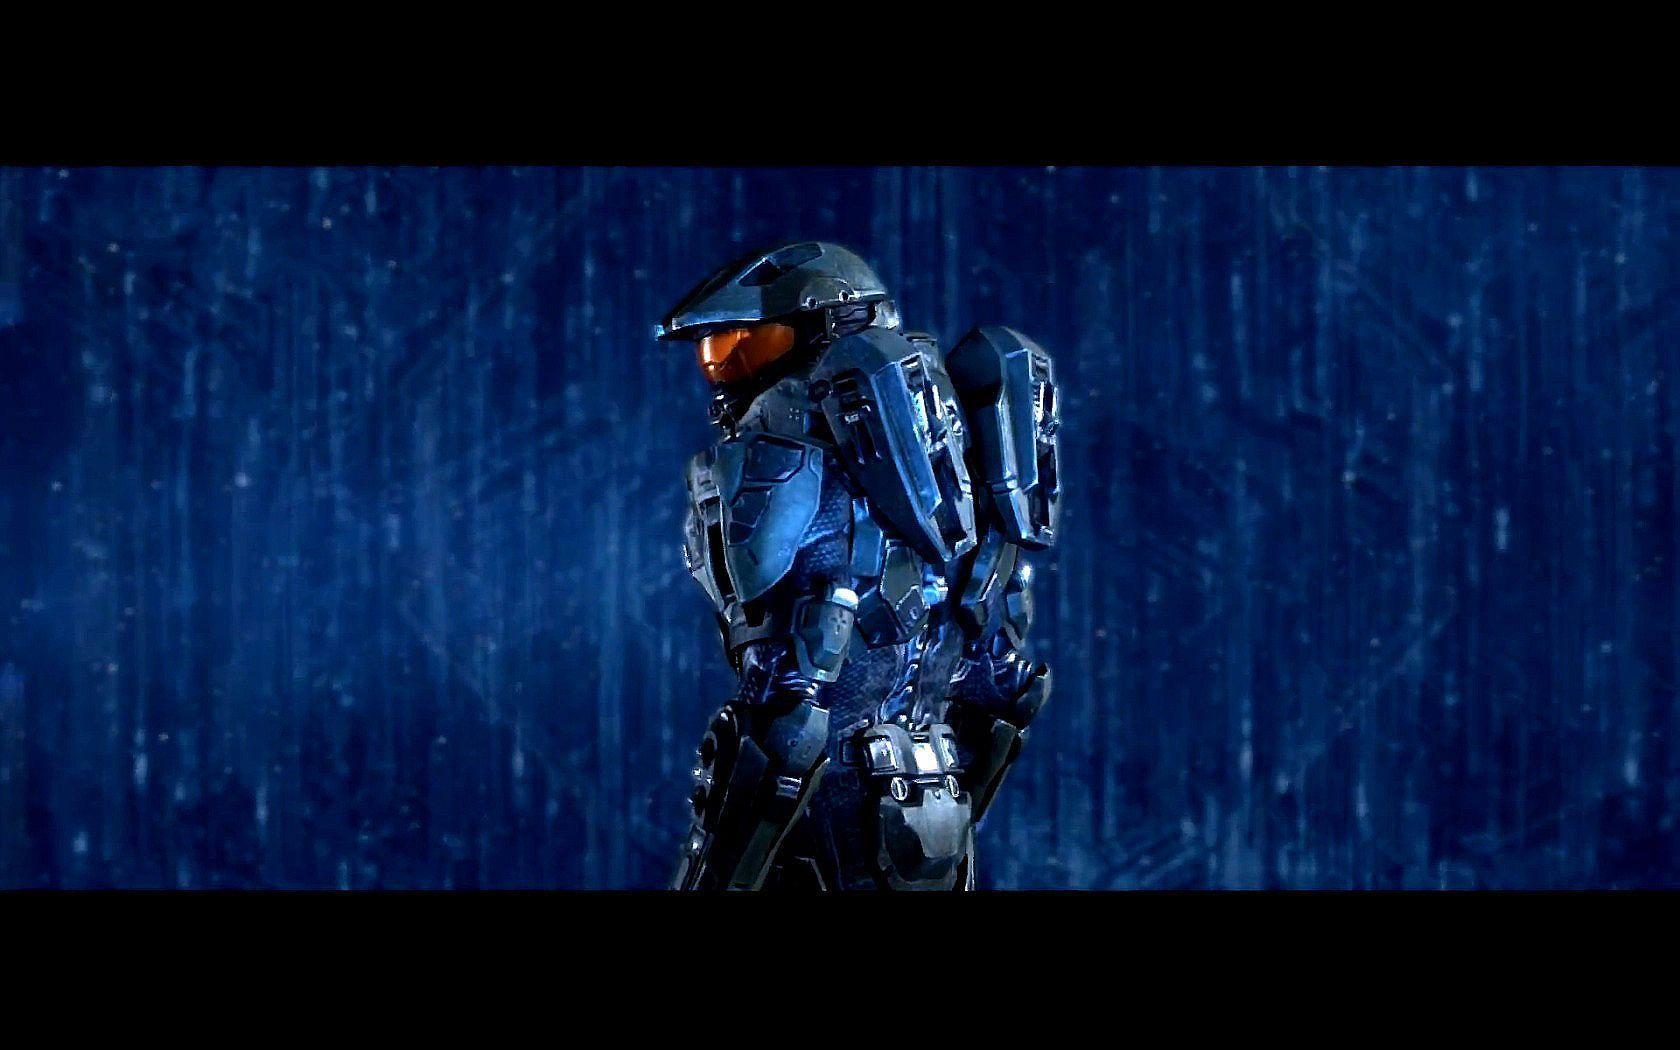 image For > Master Chief Unmasked Halo 4